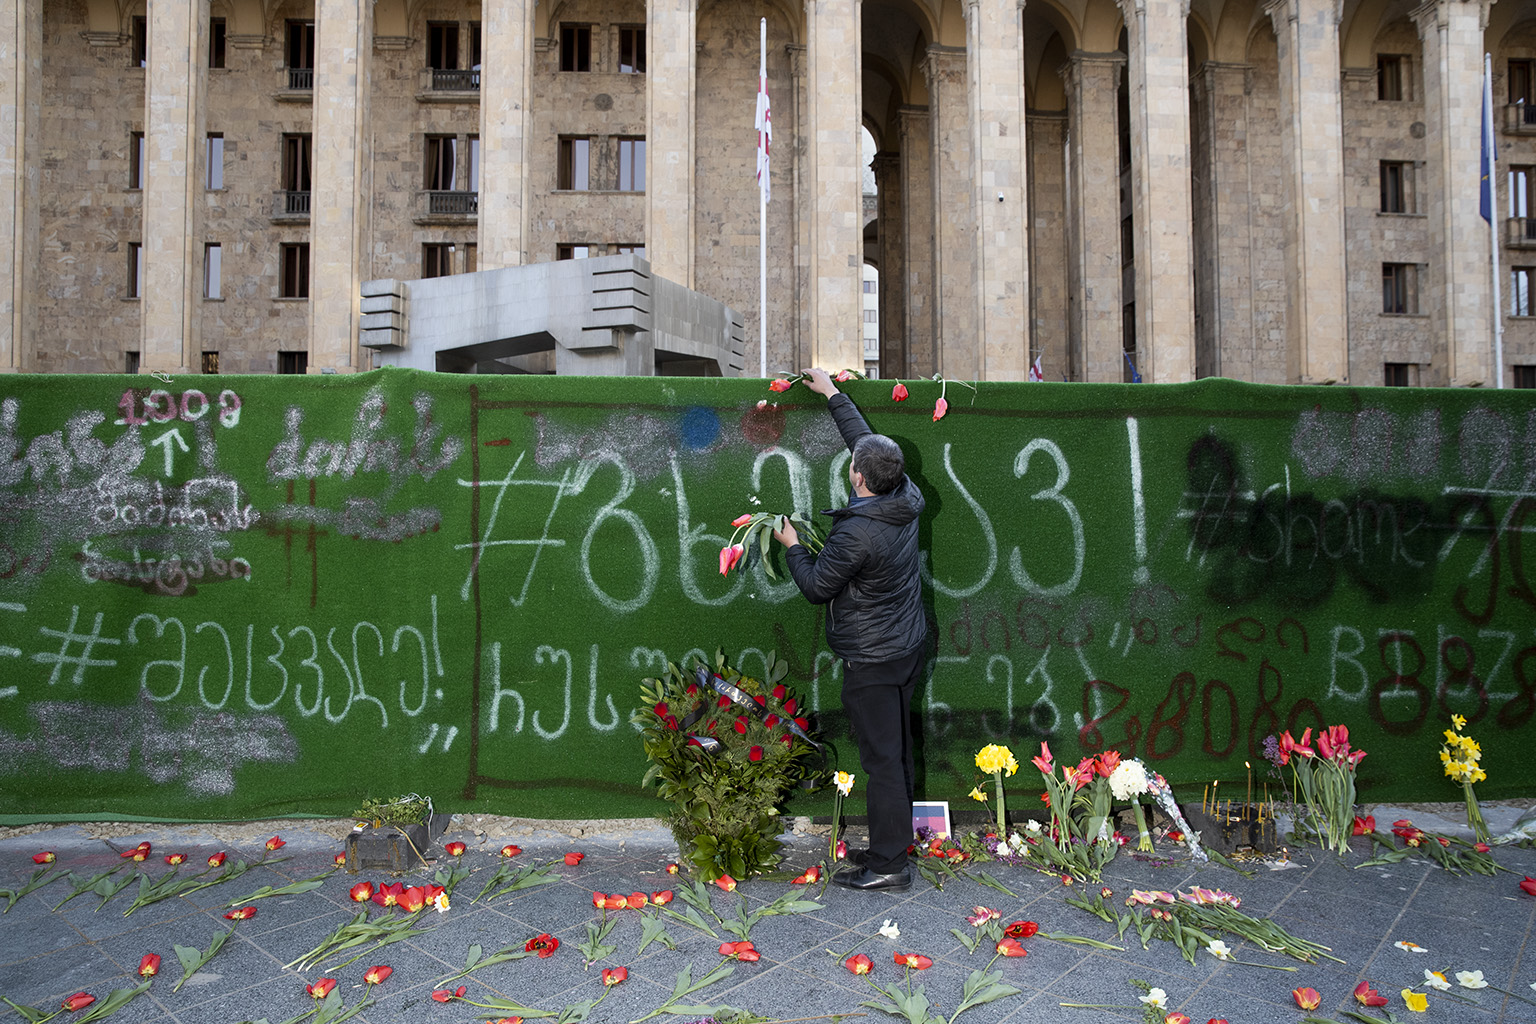 In front of the parliament. A local Georgian with flowers paying tribute to the 21 victims of the April 9 tragedy. My mom and dad were also present during the anti-soviet demonstration 31 years ago. Memorial looks sad during the crisis, but few people still came with masks. 